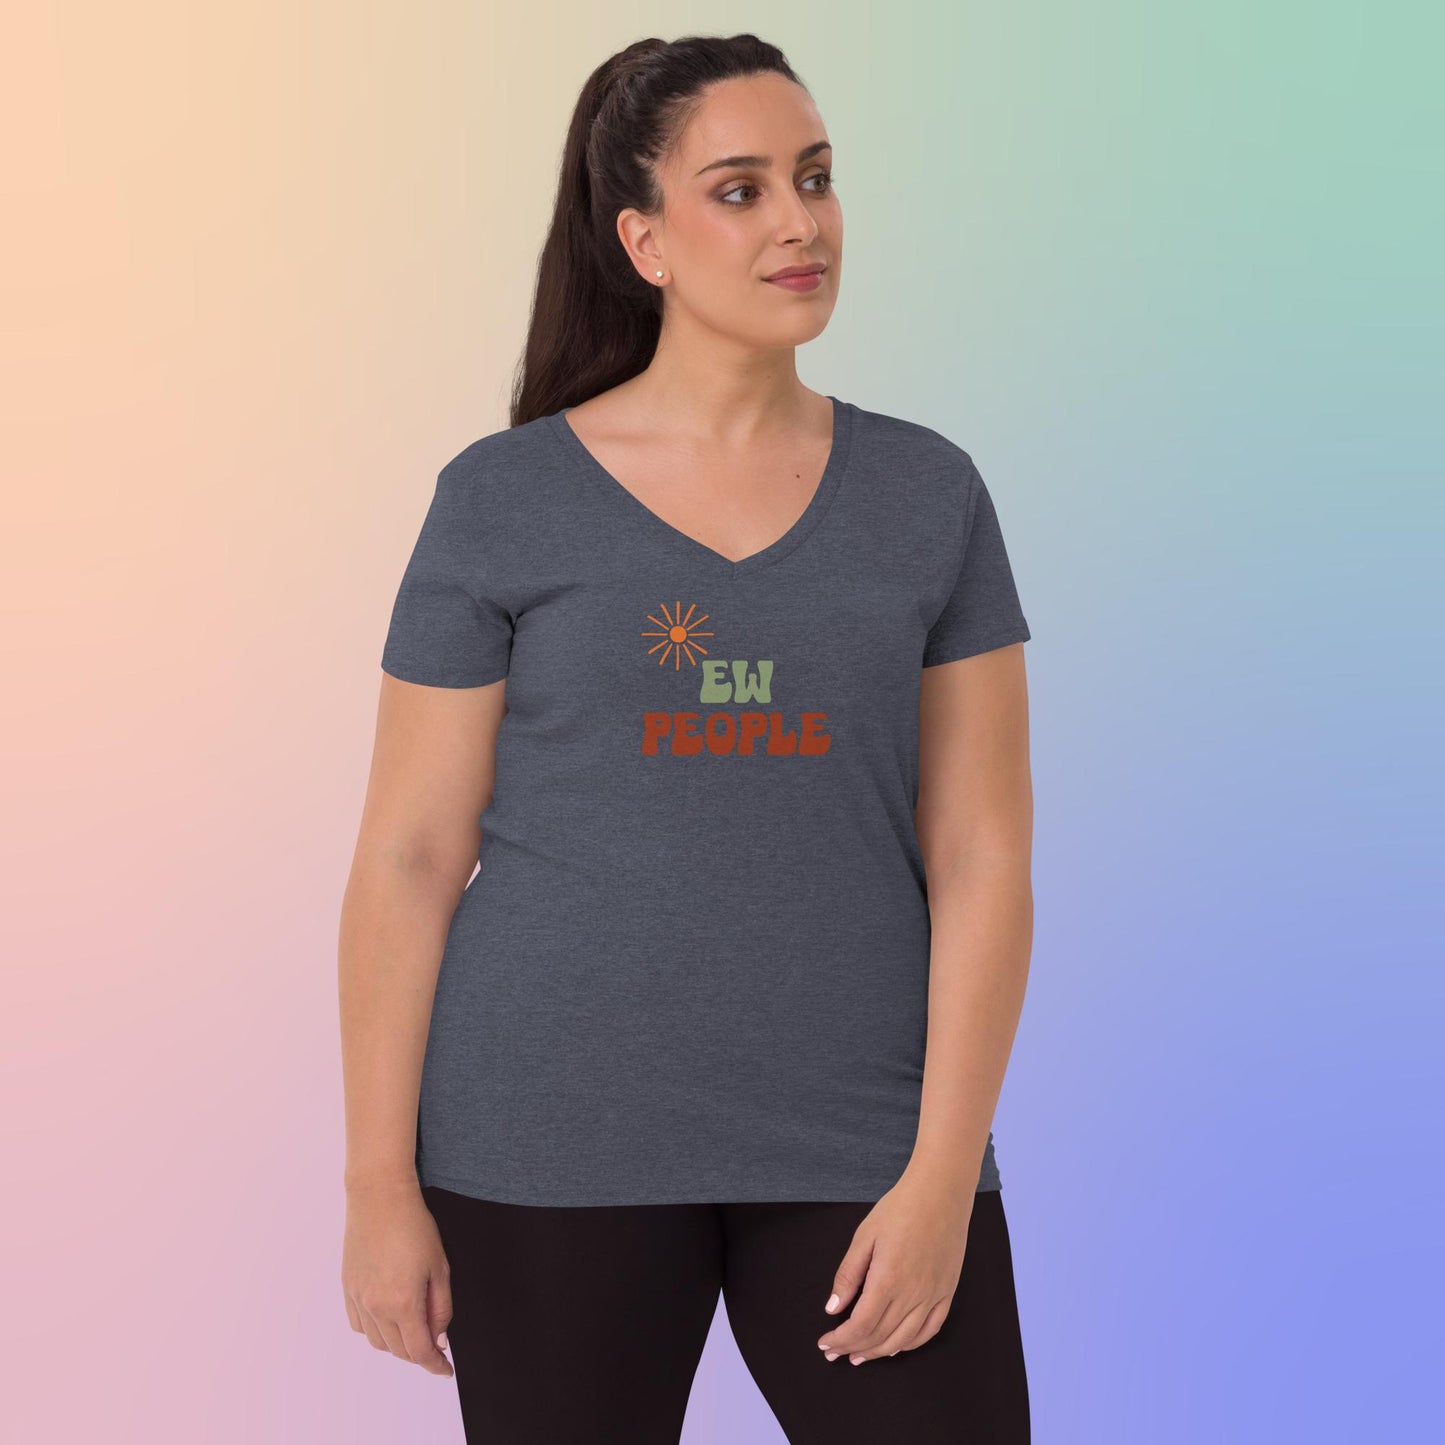 Ew, People - Women’s recycled v-neck t-shirt